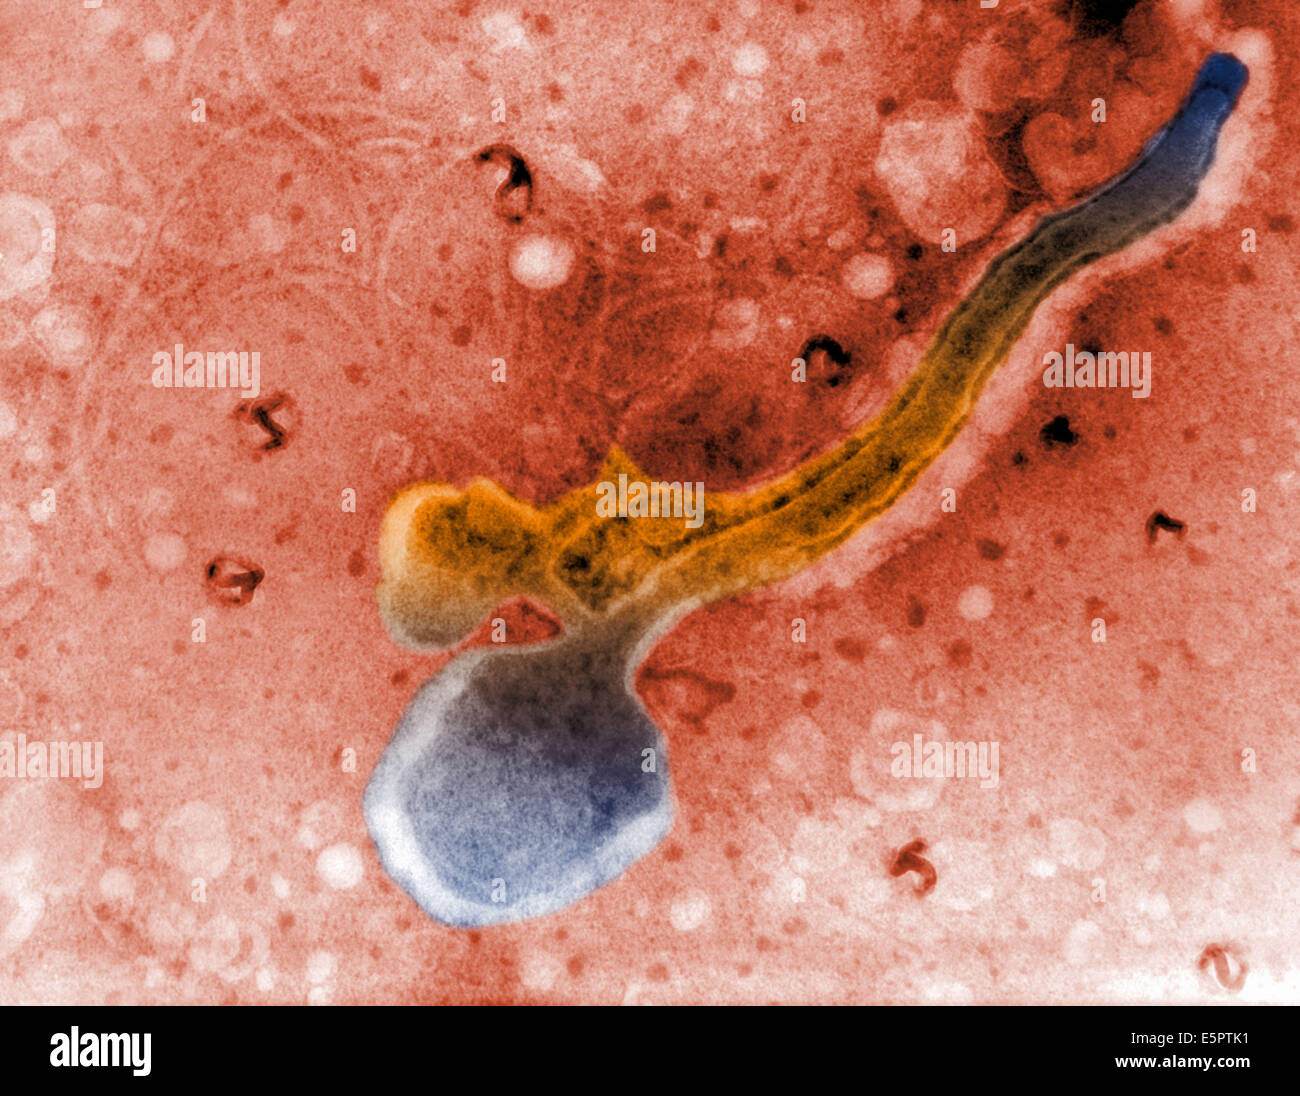 Light micrograph of a Treponema pallidum, This spirochaete bacterium is the agent of syphilis. Stock Photo